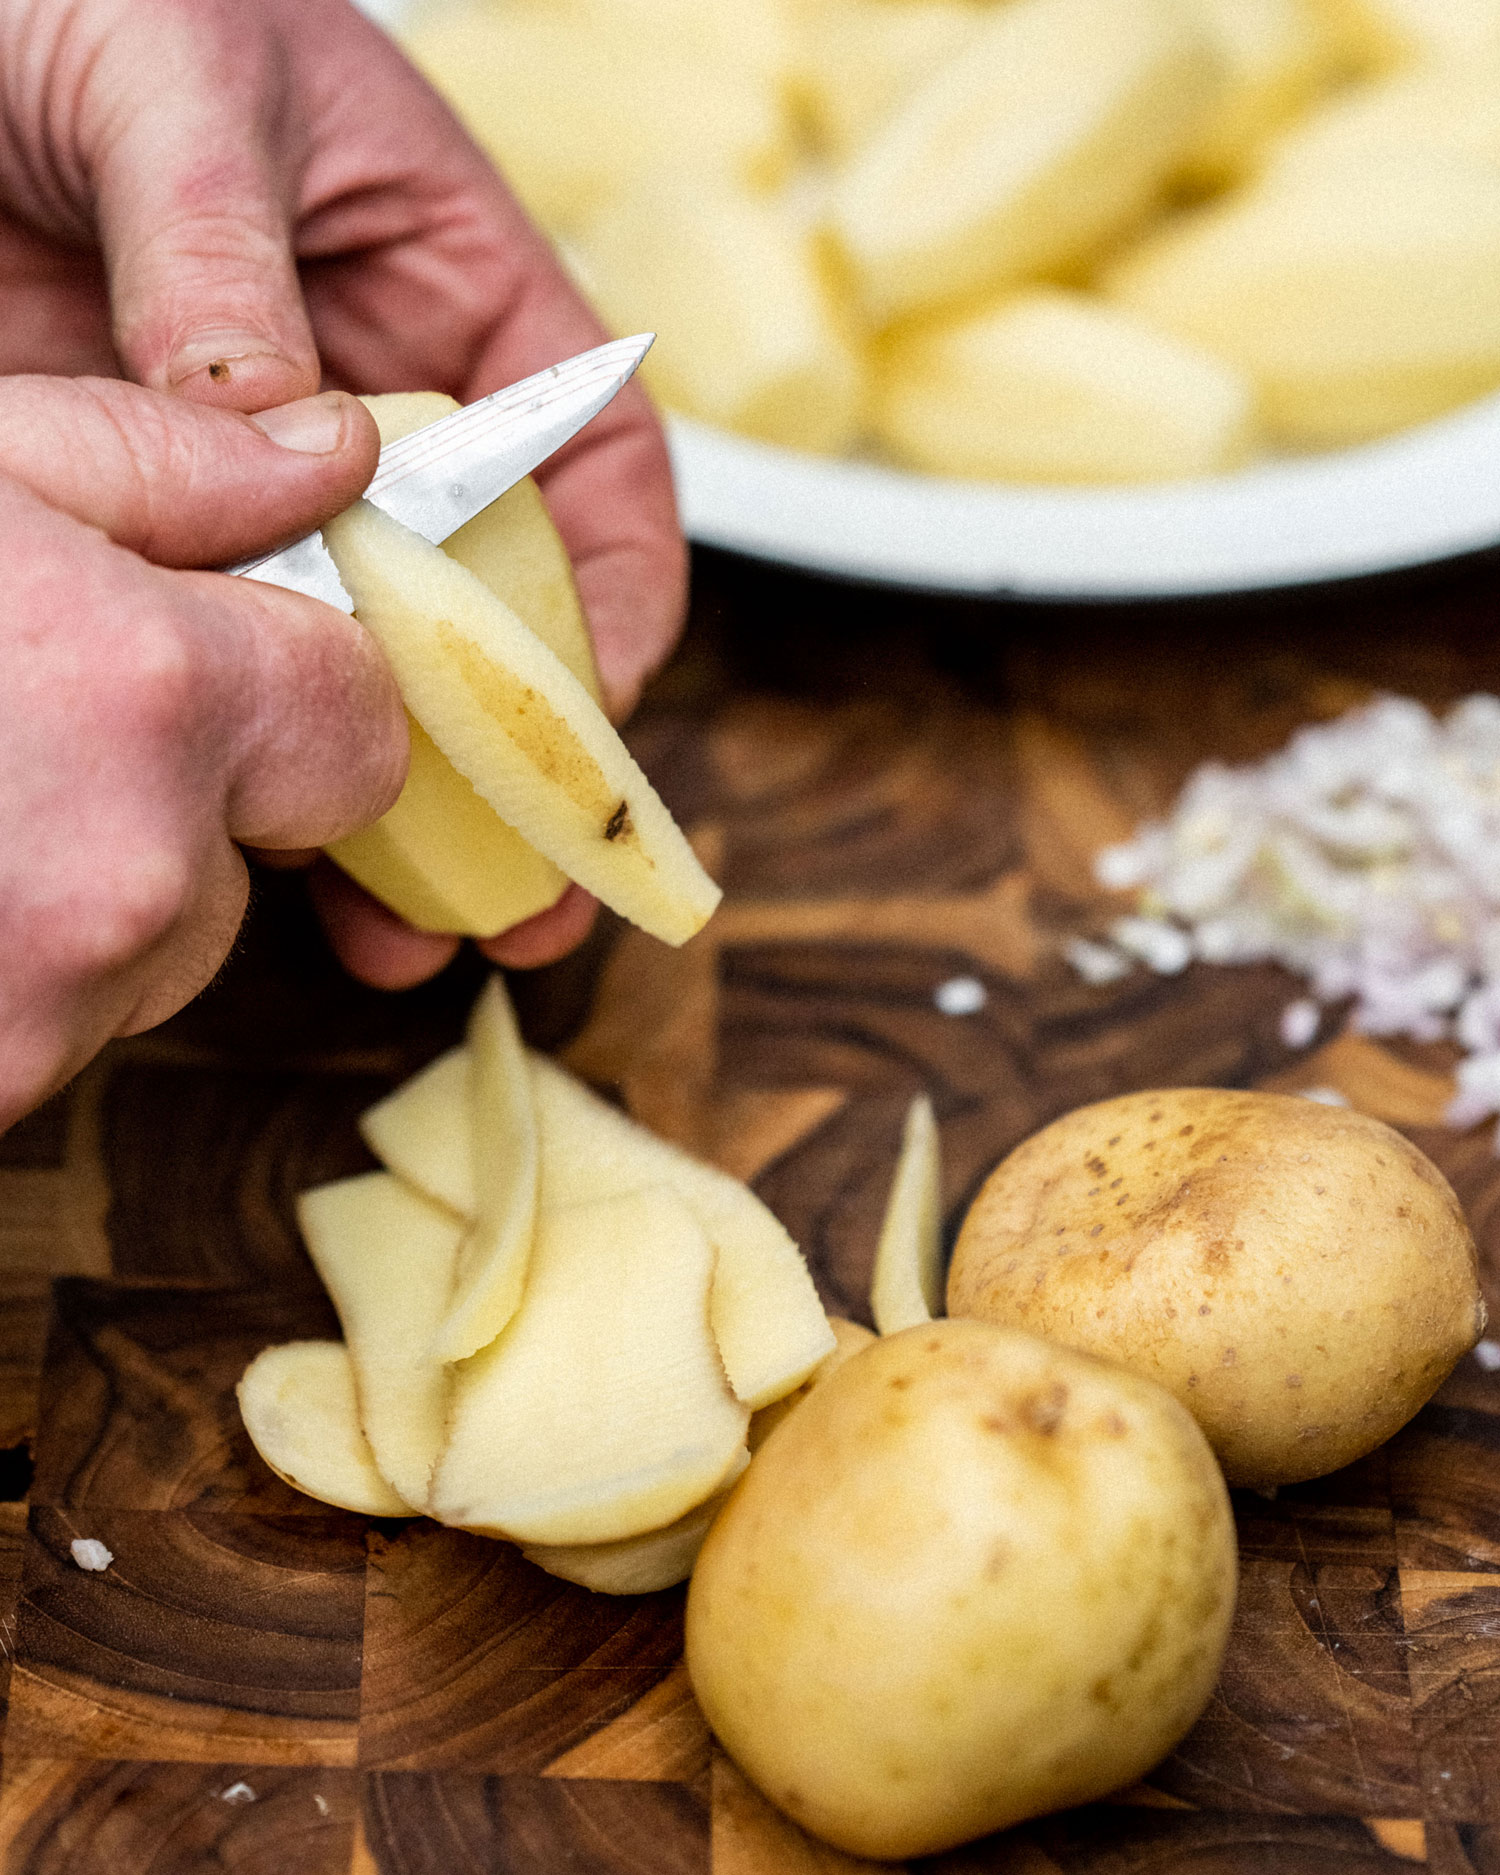 peel your spuds